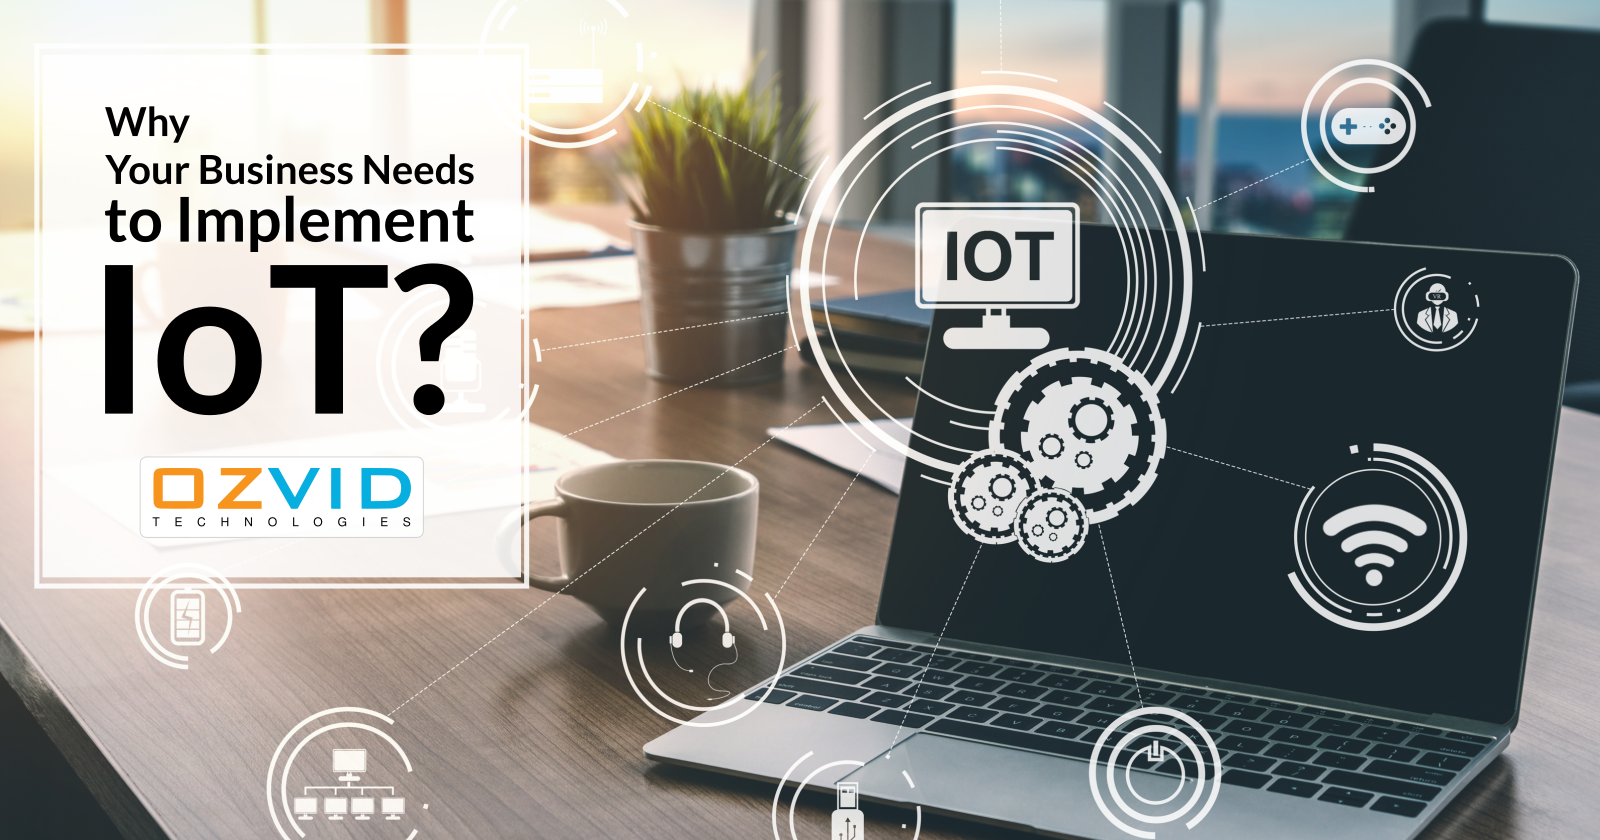 4 Reasons Why Your Business Needs to Implement IoT?